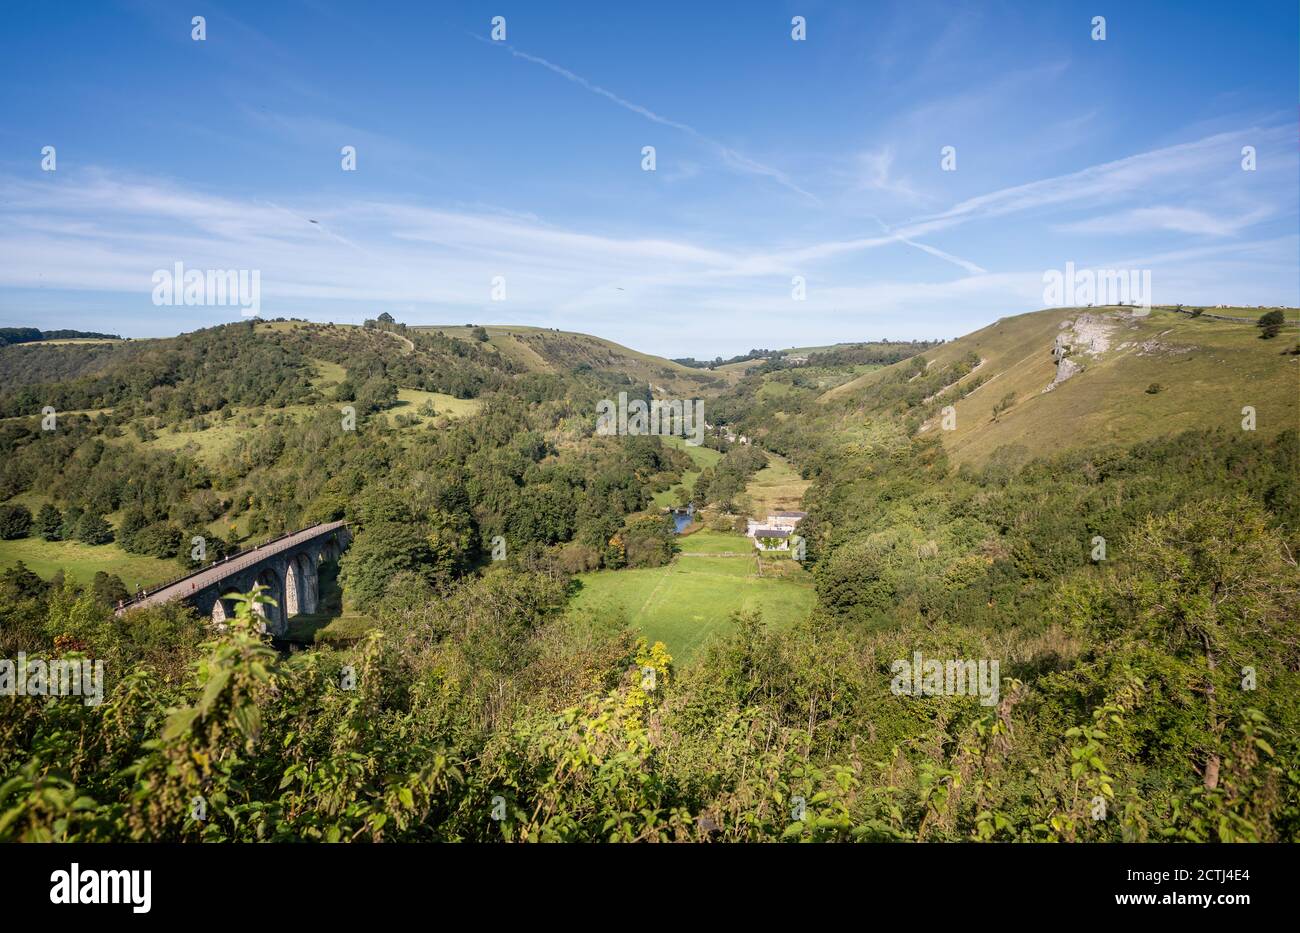 Panoramic view of Monsal Dale and the Headstone Viaduct from Monsal Head in Derbyshire, UK on 14 September 2020 Stock Photo